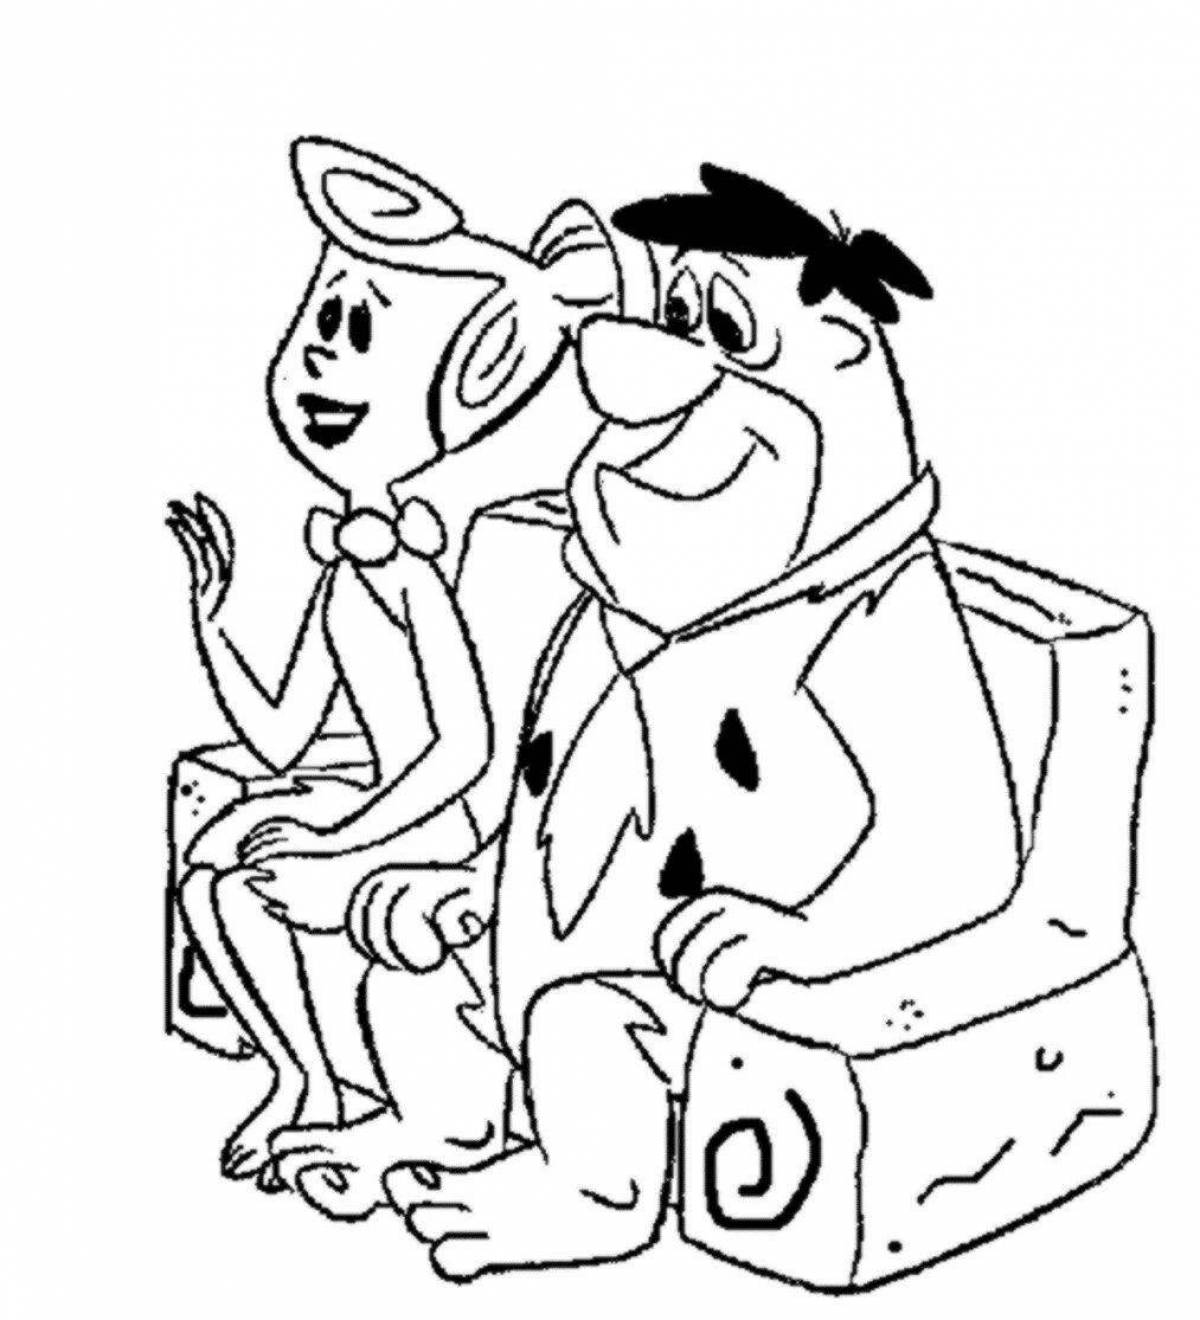 Fred flintstone's funny coloring book